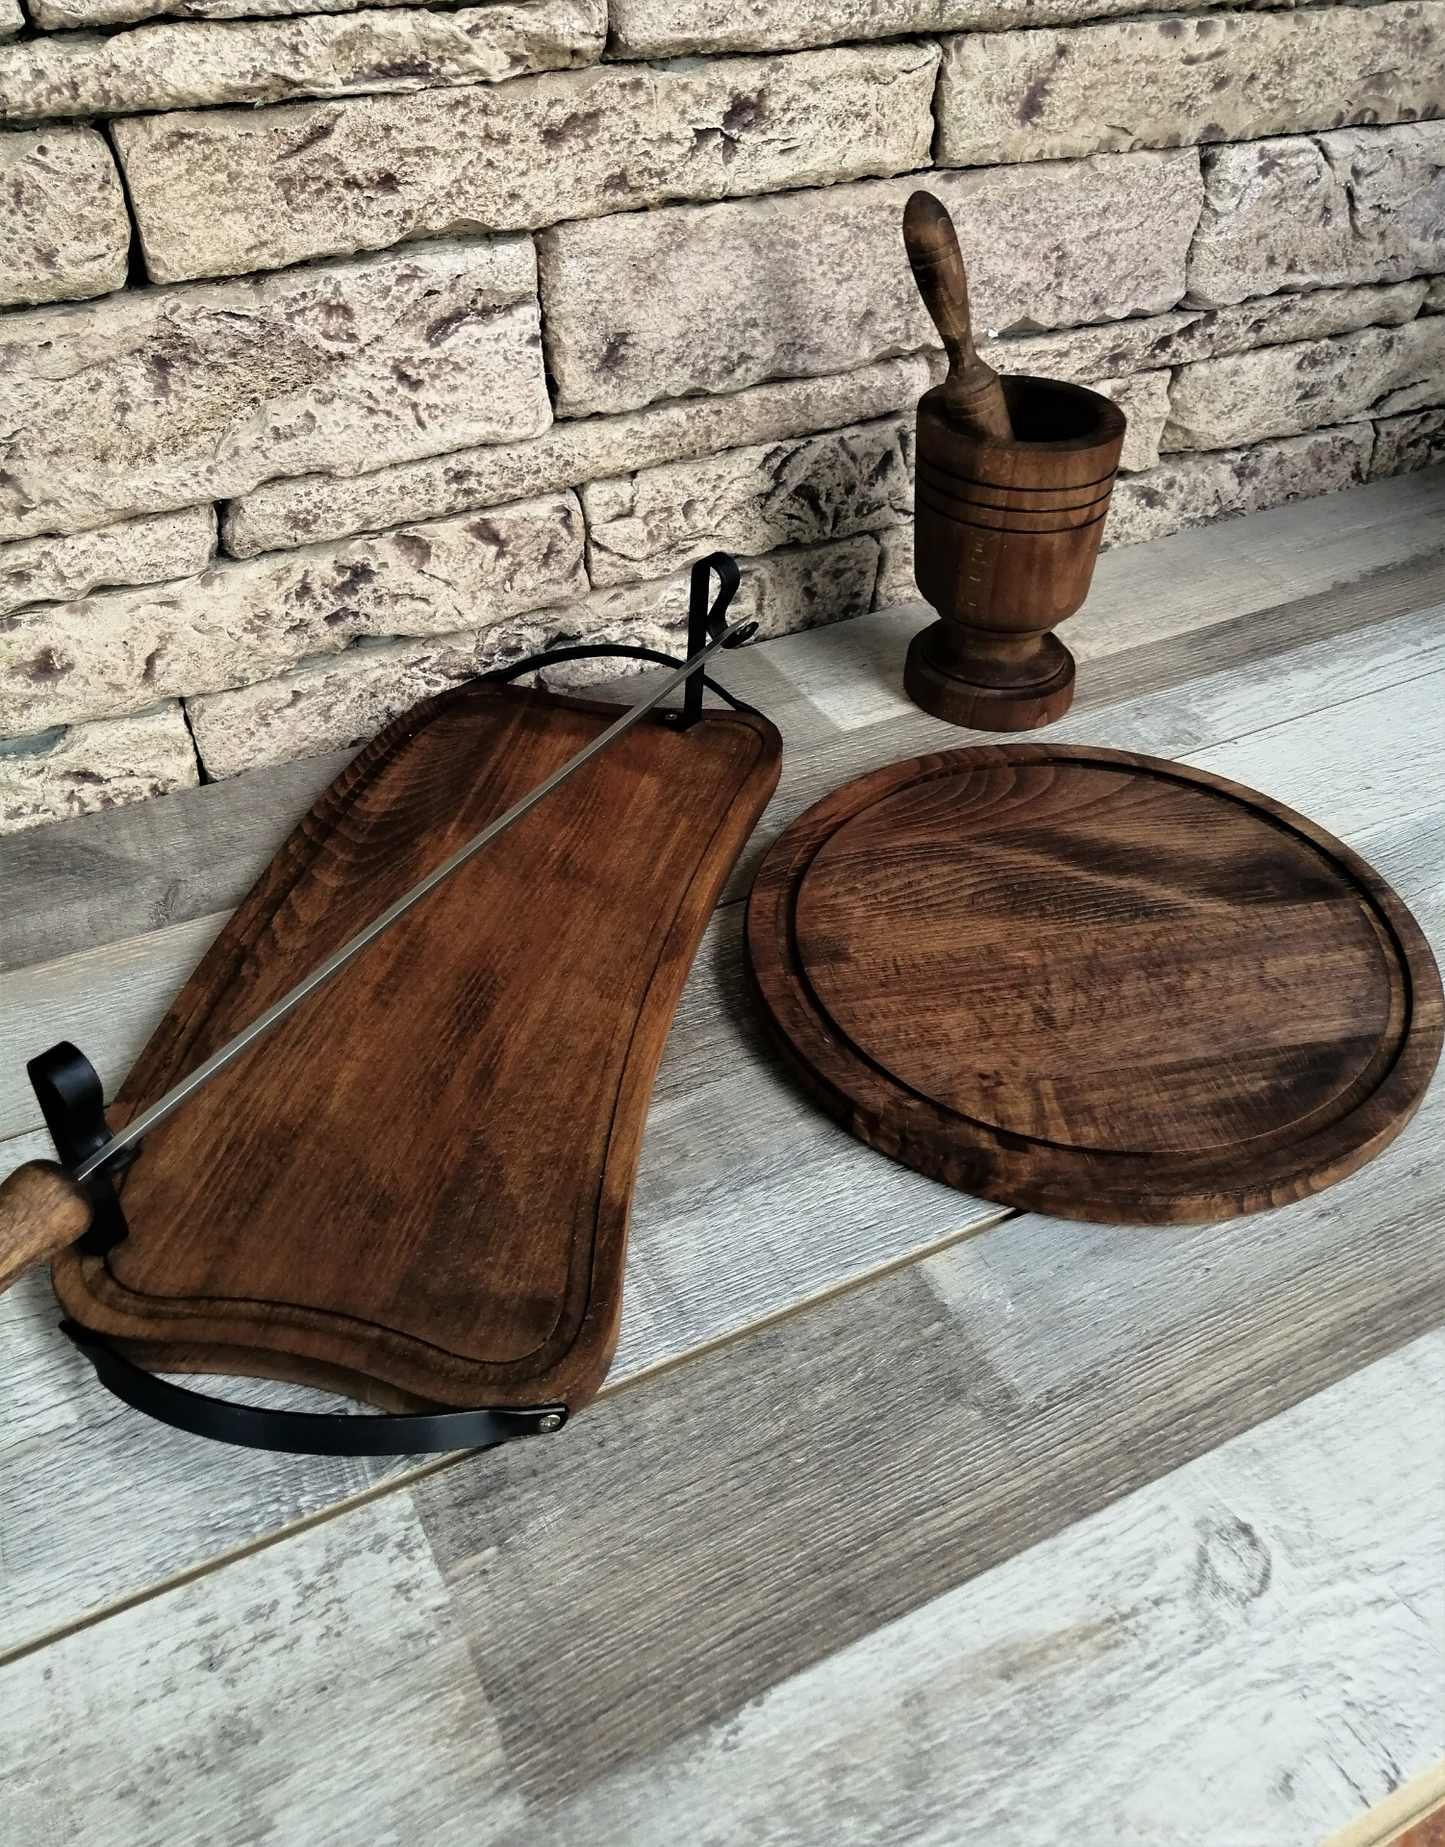 Barbecue grilling set, serving tray, cutting wood board, mortar for crushing spices